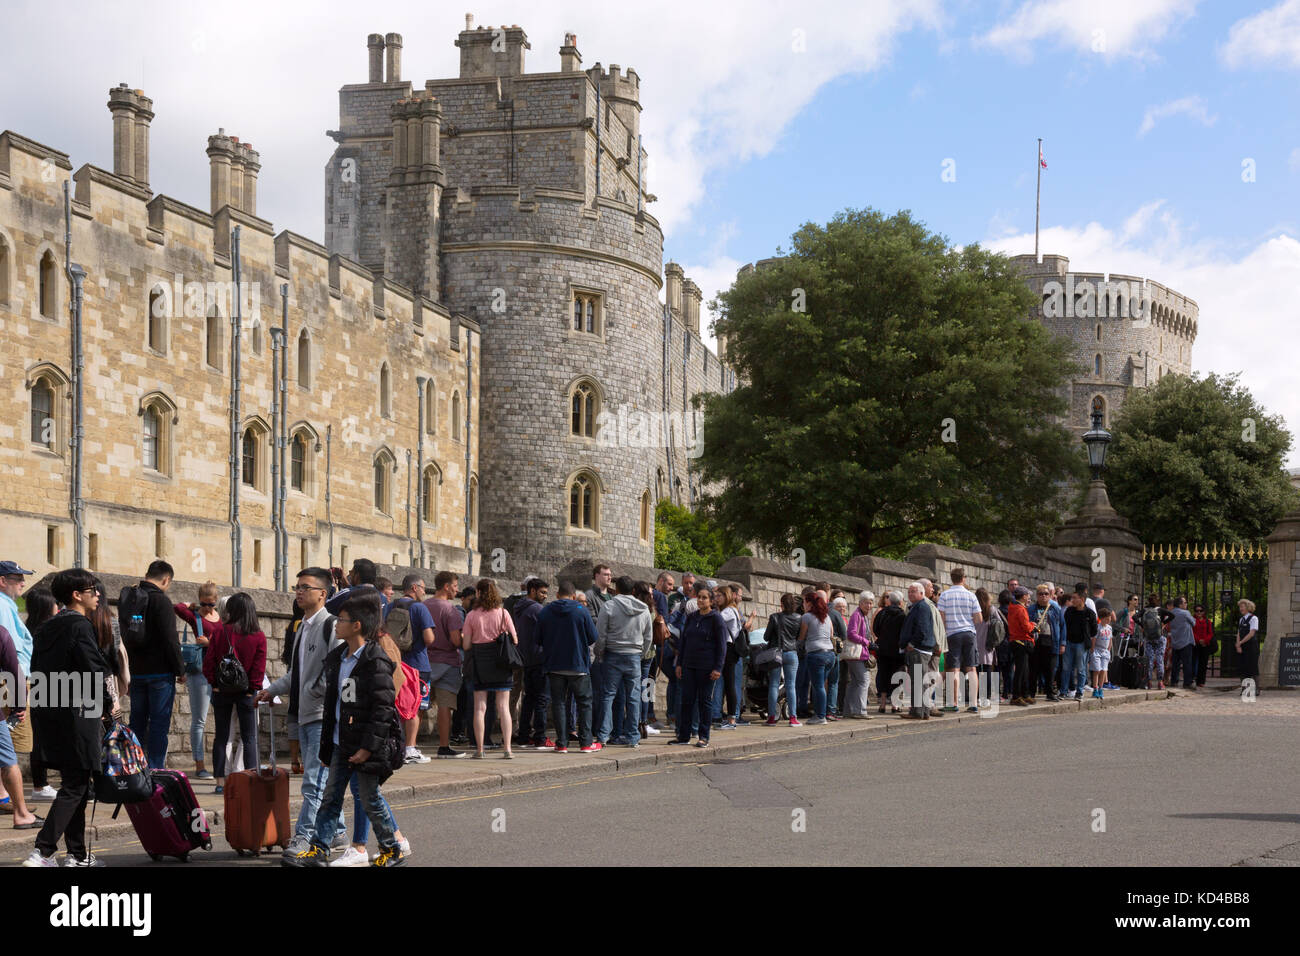 Windsor Castle crowd - people forming a long queue to visit Windsor Castle, Windsor, Berkshire England  UK Stock Photo